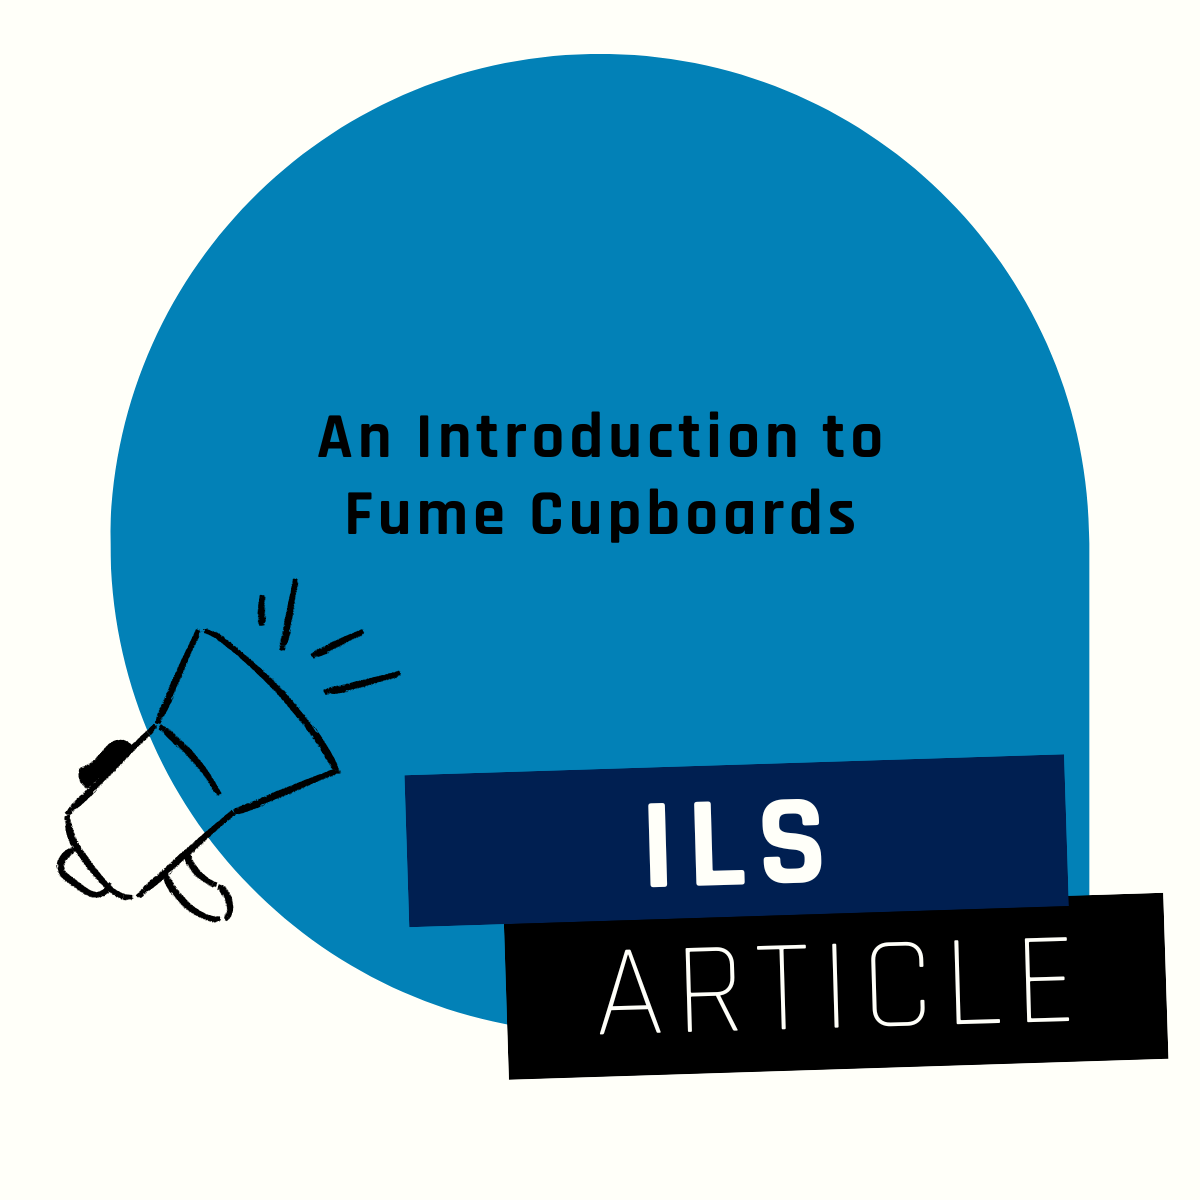 An Introduction to Fume Cupboards